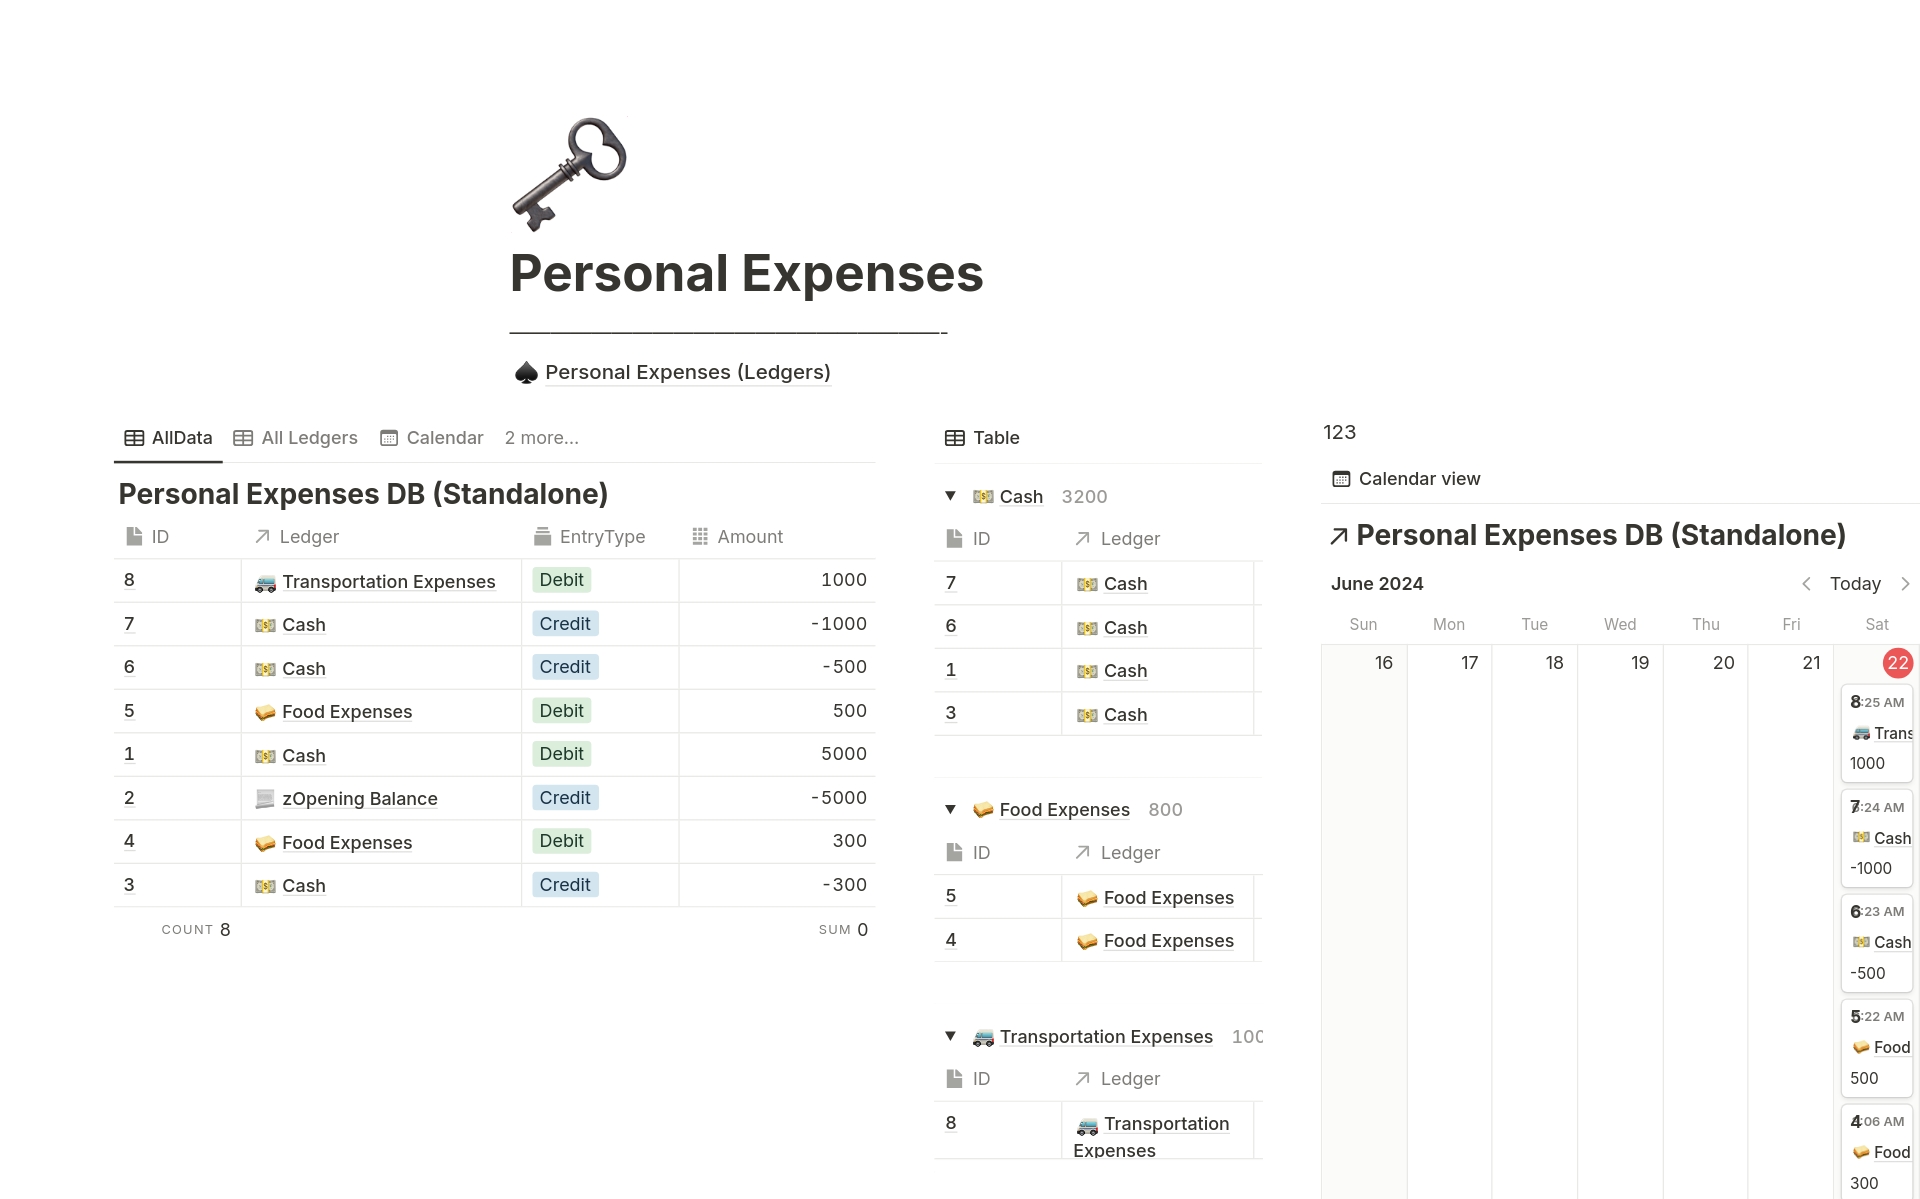 Track your finances effortlessly with this Personal Expense Recording Template in Notion! Log transactions, view daily expenses in the integrated calendar, and monitor balances with automated calculations.